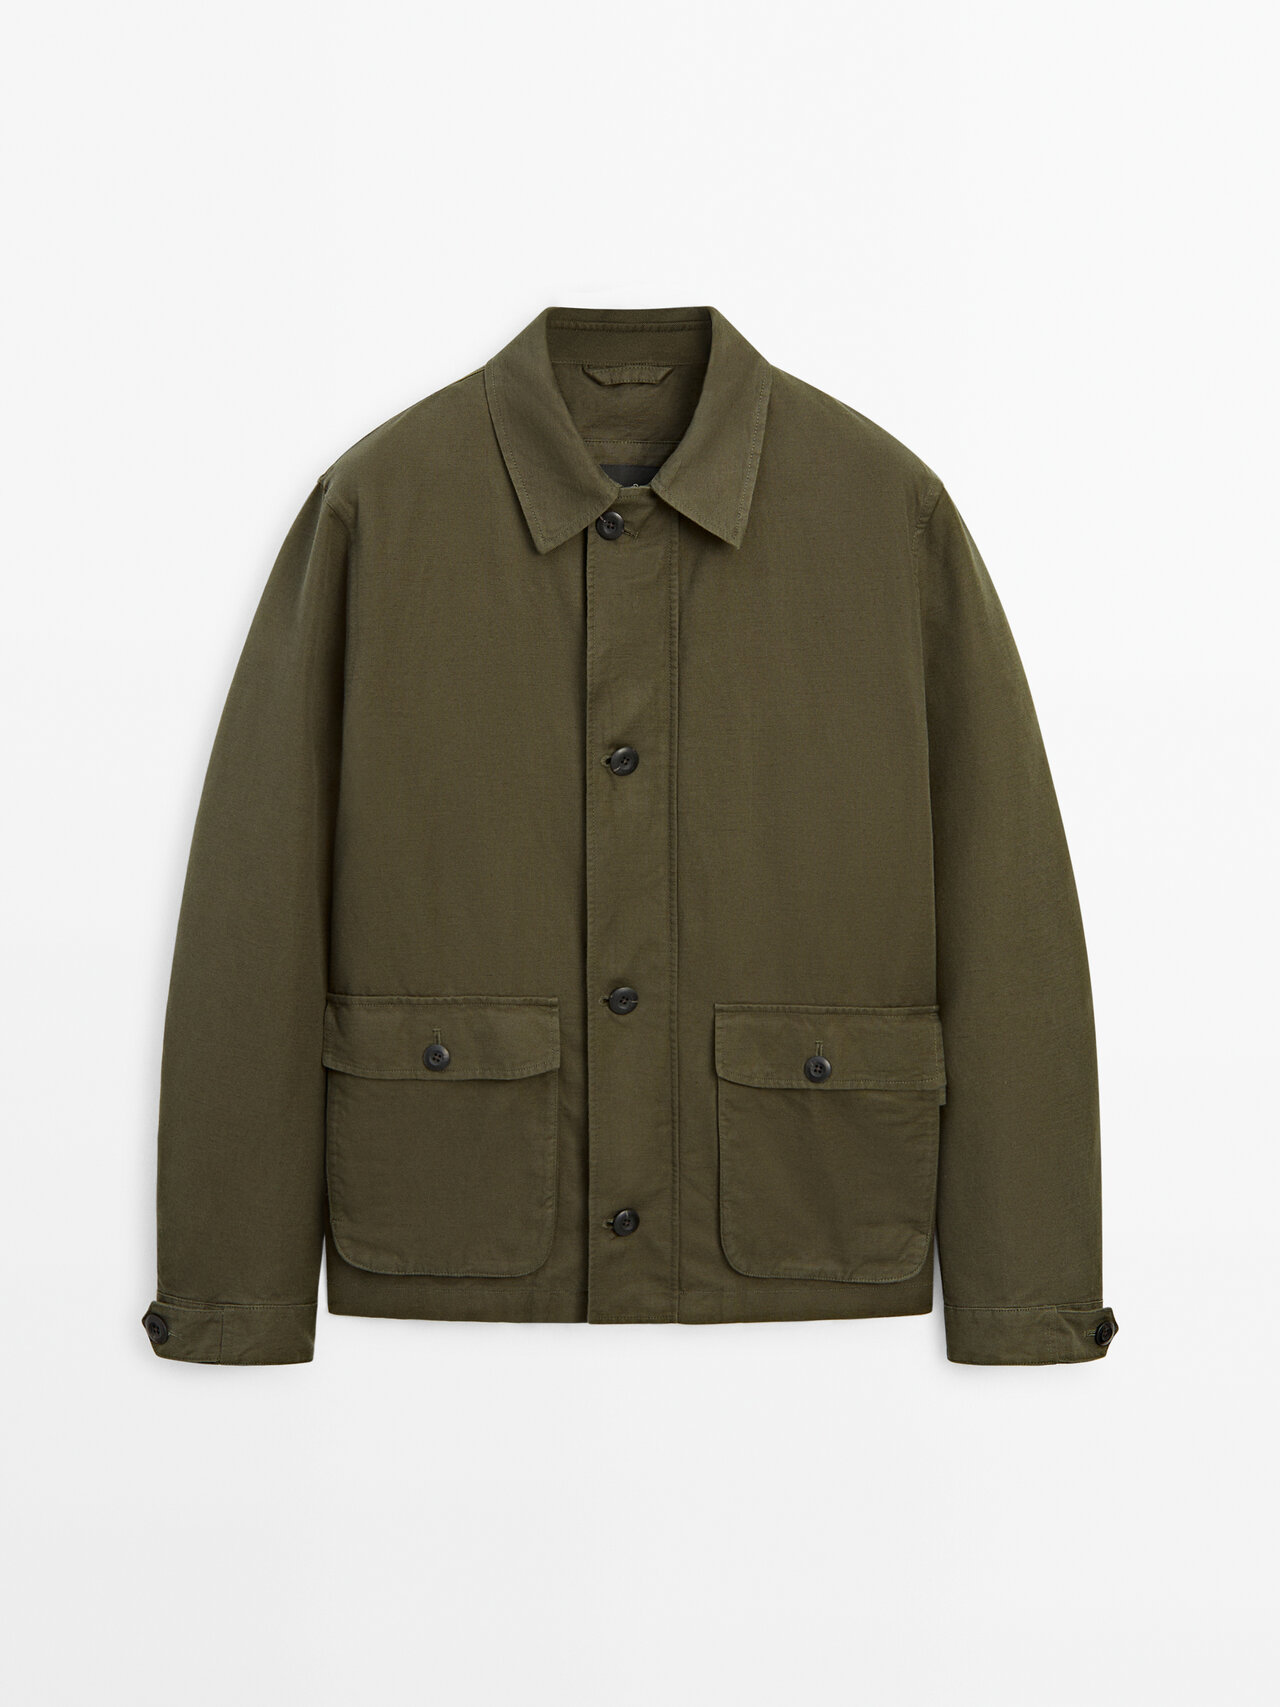 Massimo Dutti Linen And Cotton Blend Jacket With Pockets In Khaki